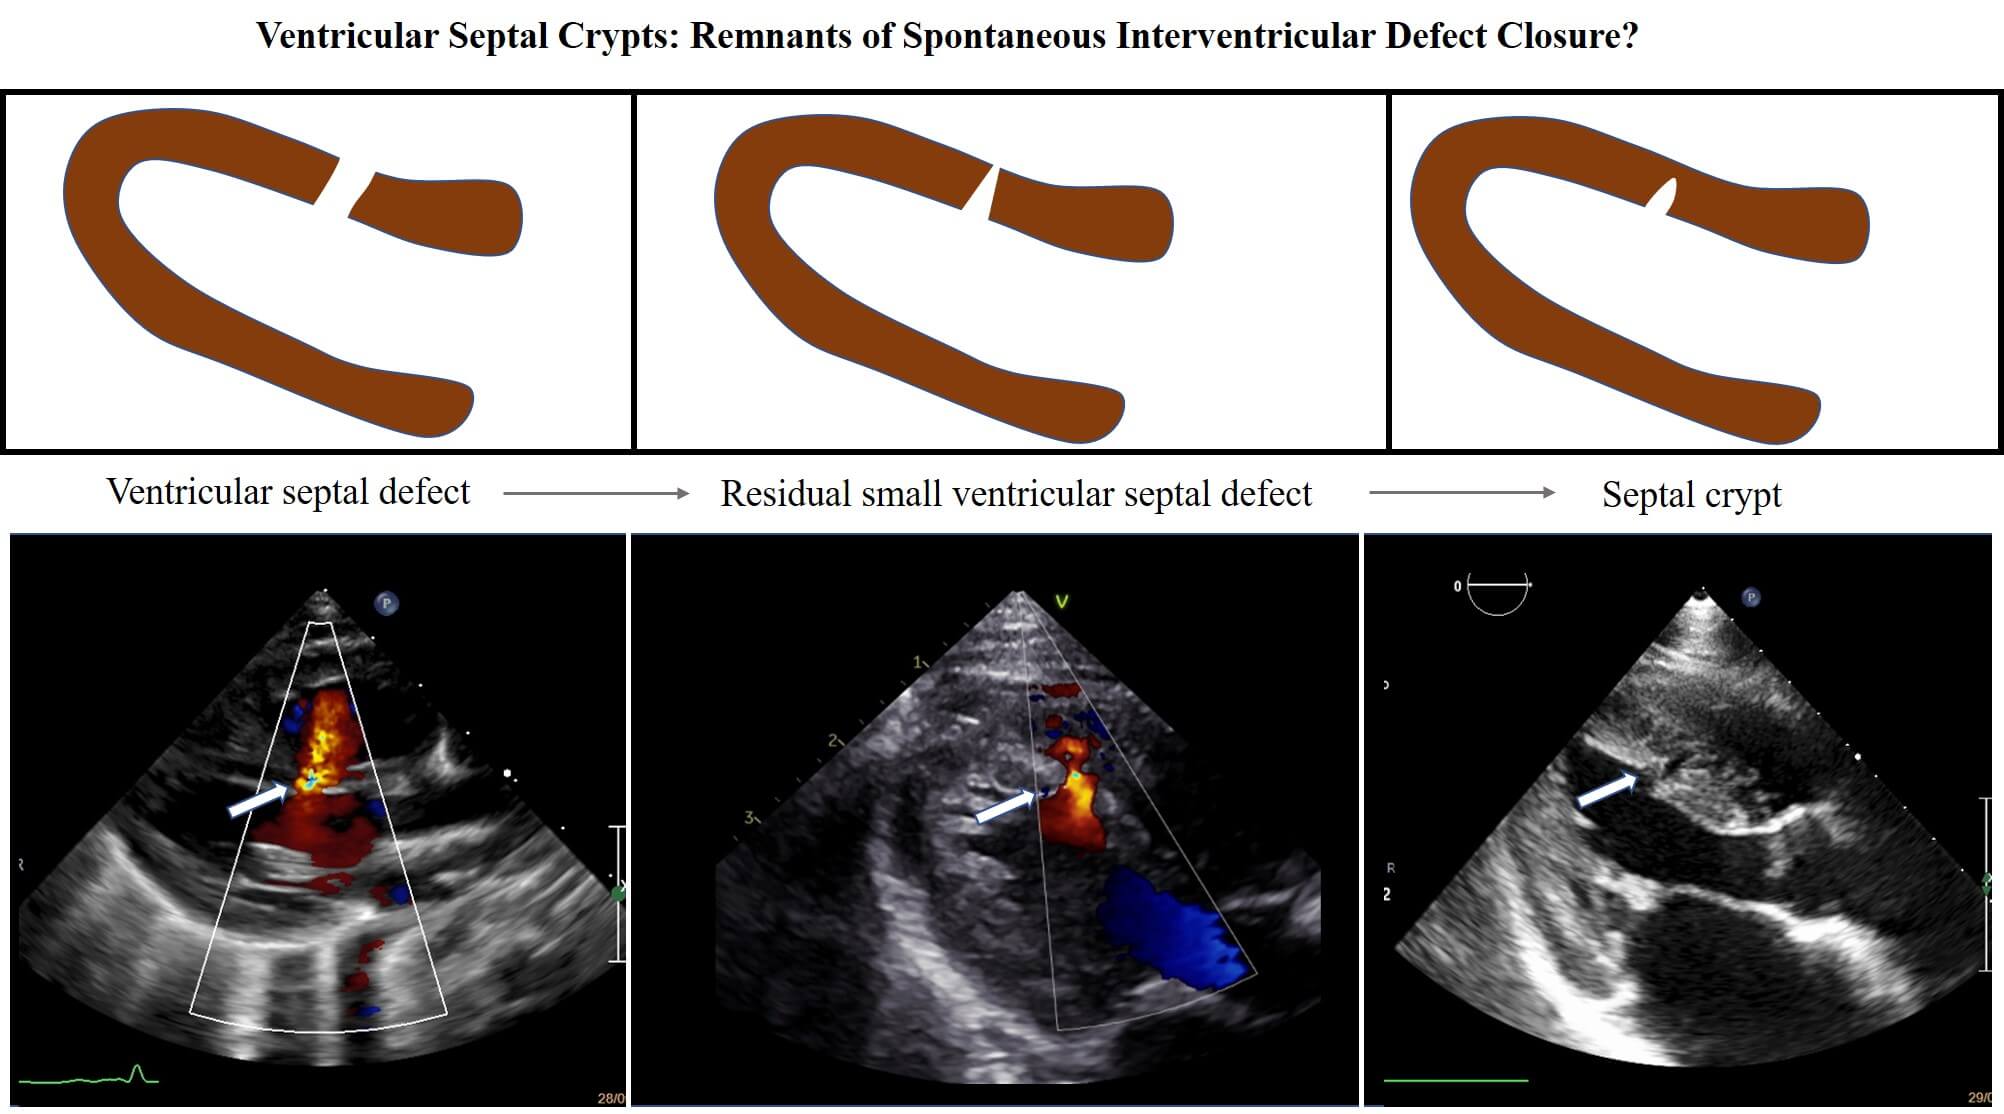 Ventricular Septal Crypts: Remnants of Spontaneous Interventricular Defect Closure?